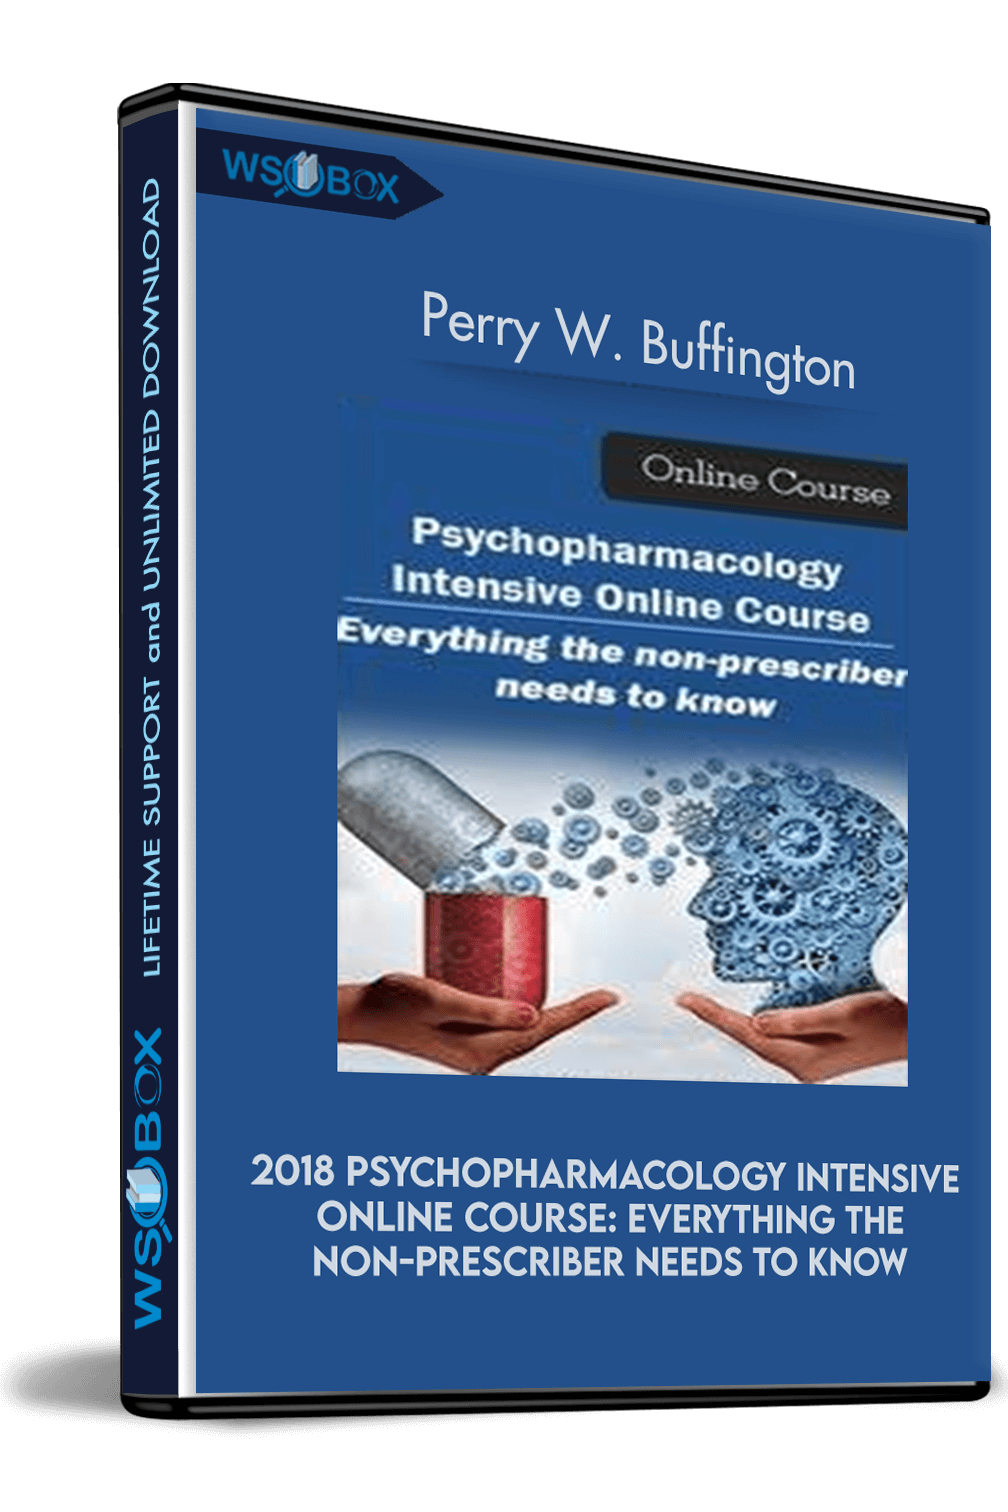 2018-psychopharmacology-intensive-online-course-everything-the-non-prescriber-needs-to-know-perry-w-buffington